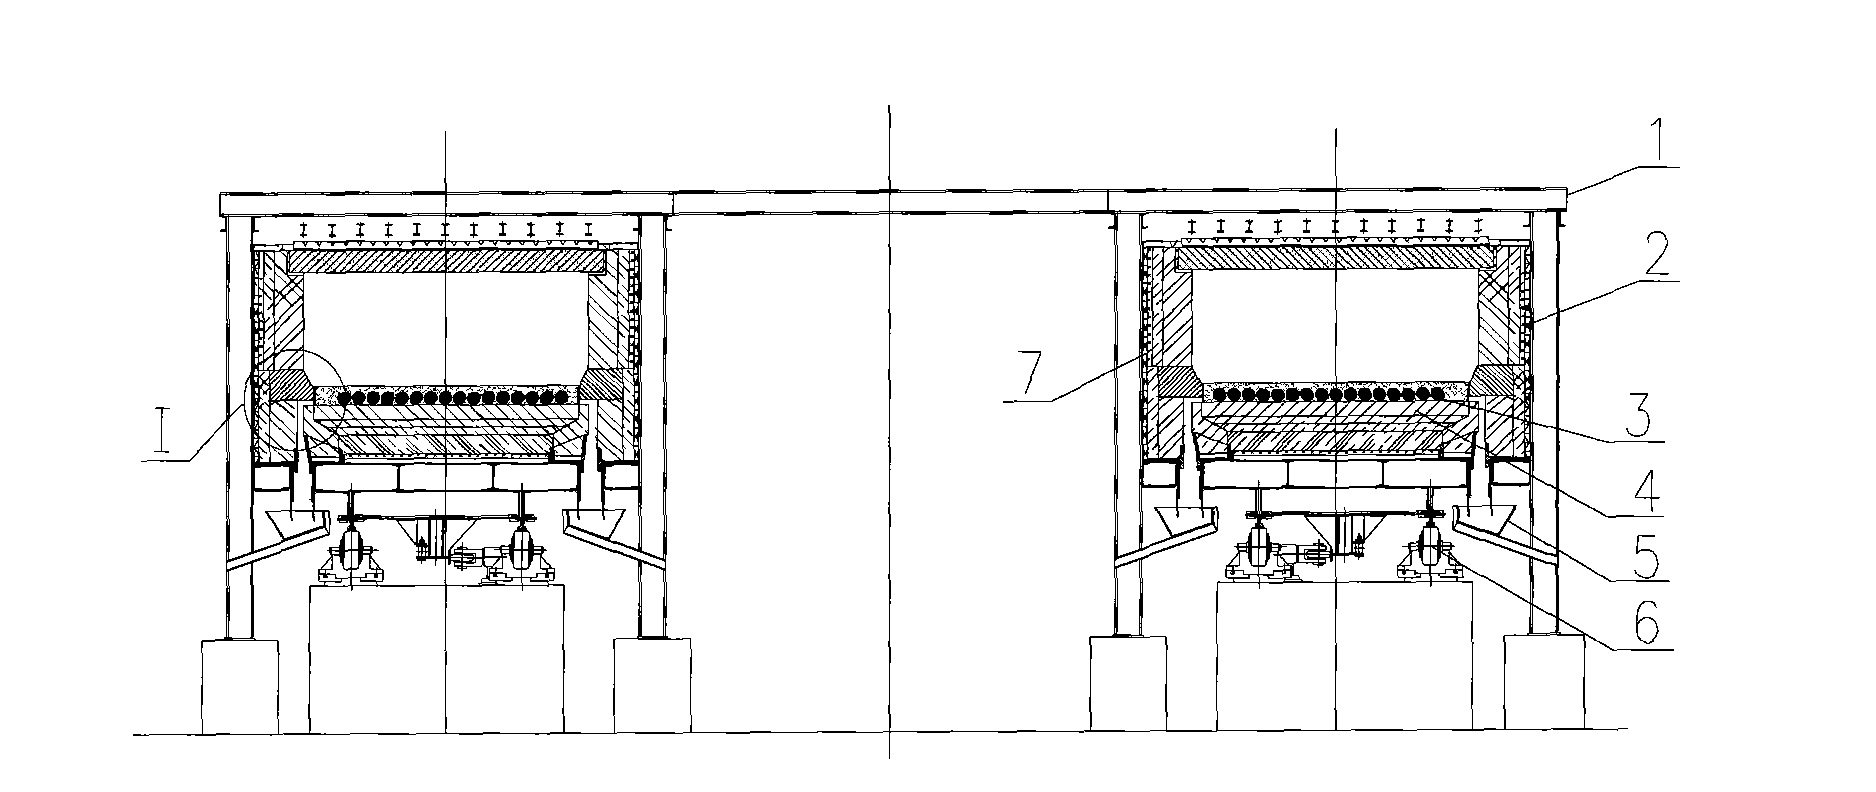 Annular reduction furnace capable of not leaking material at furnace bottom